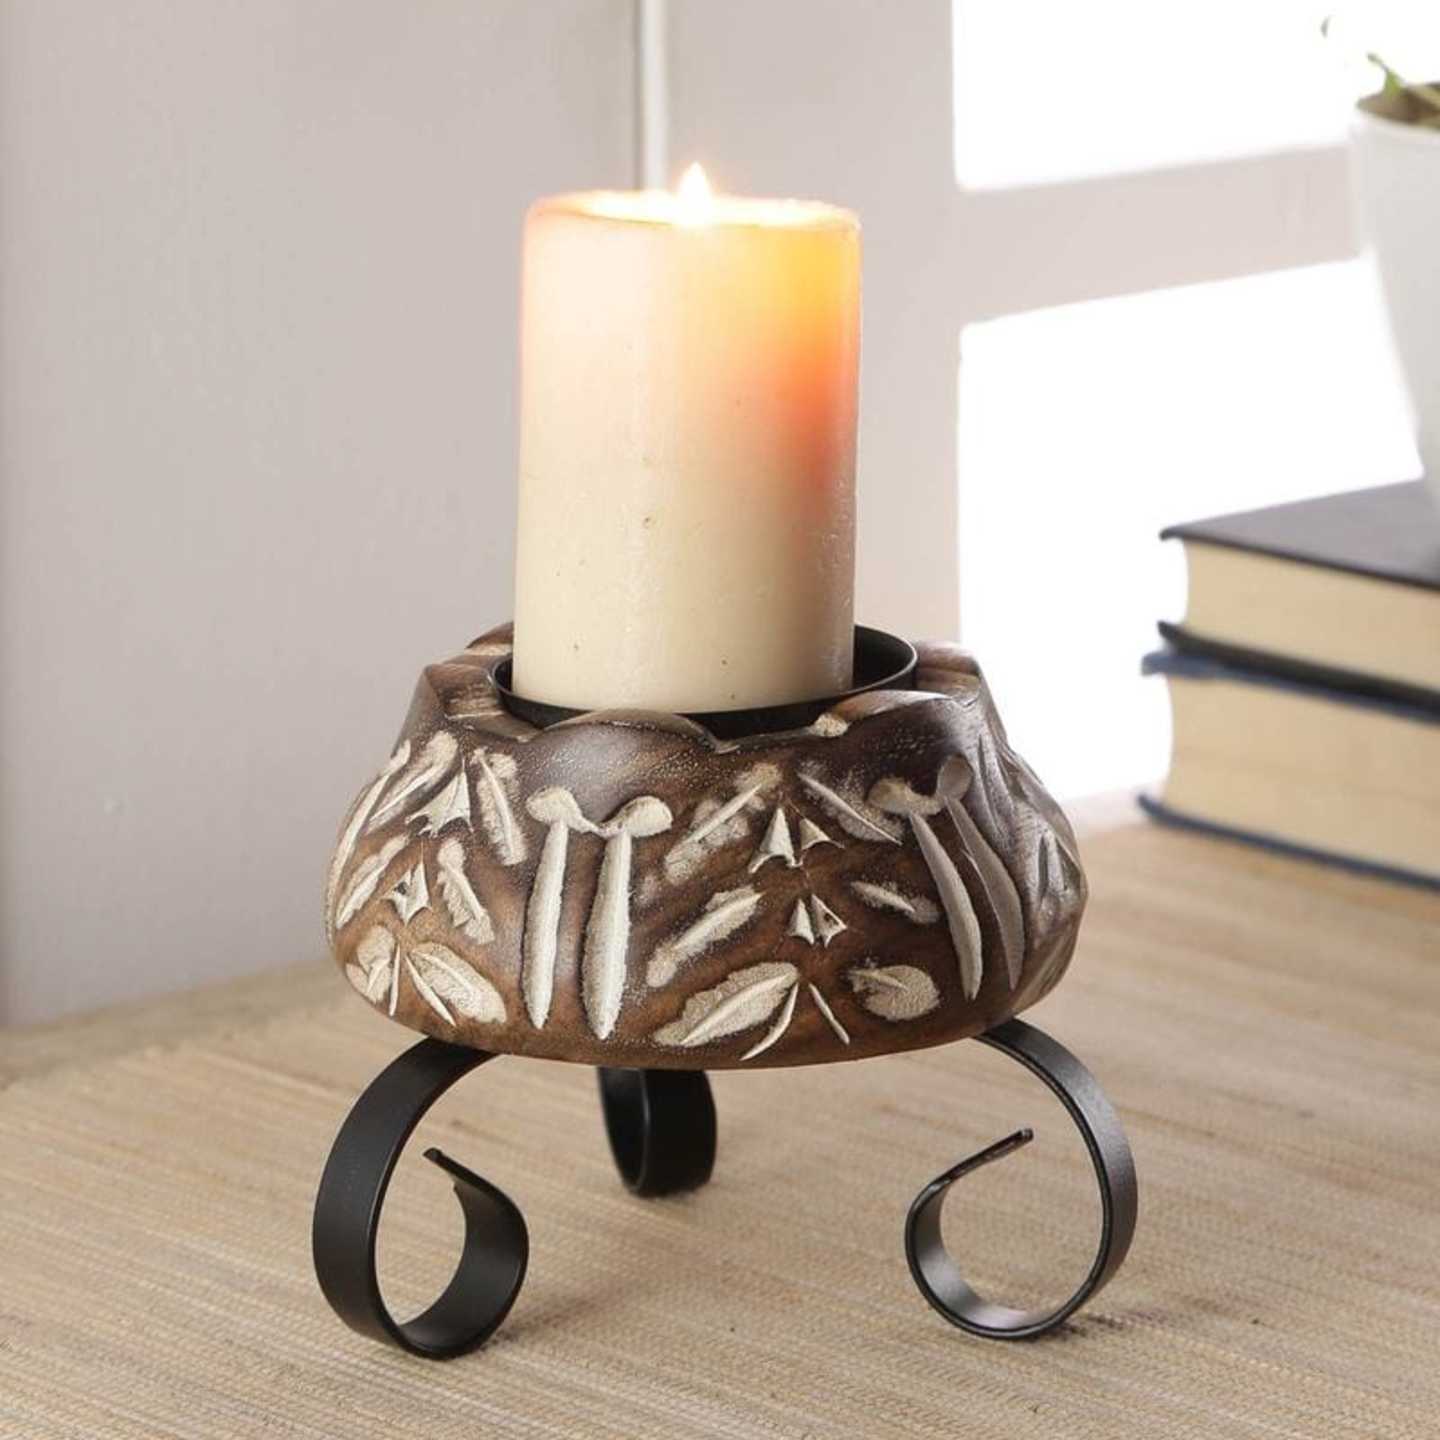 Candle stand-lotus